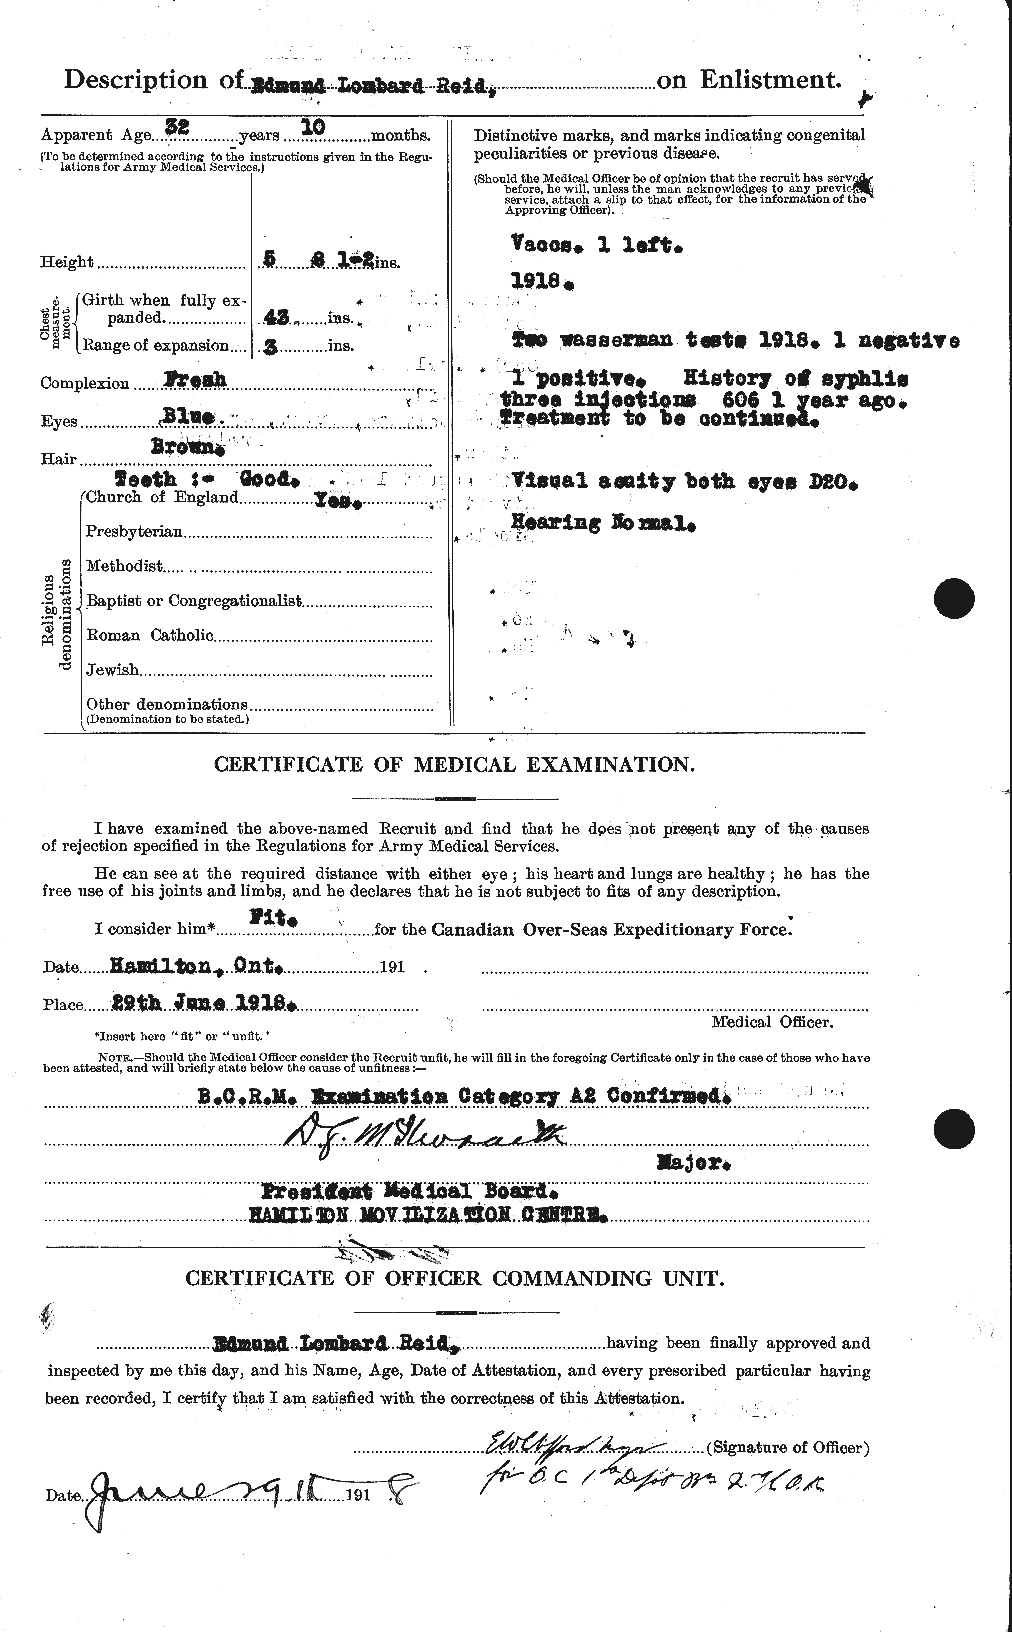 Personnel Records of the First World War - CEF 597980b